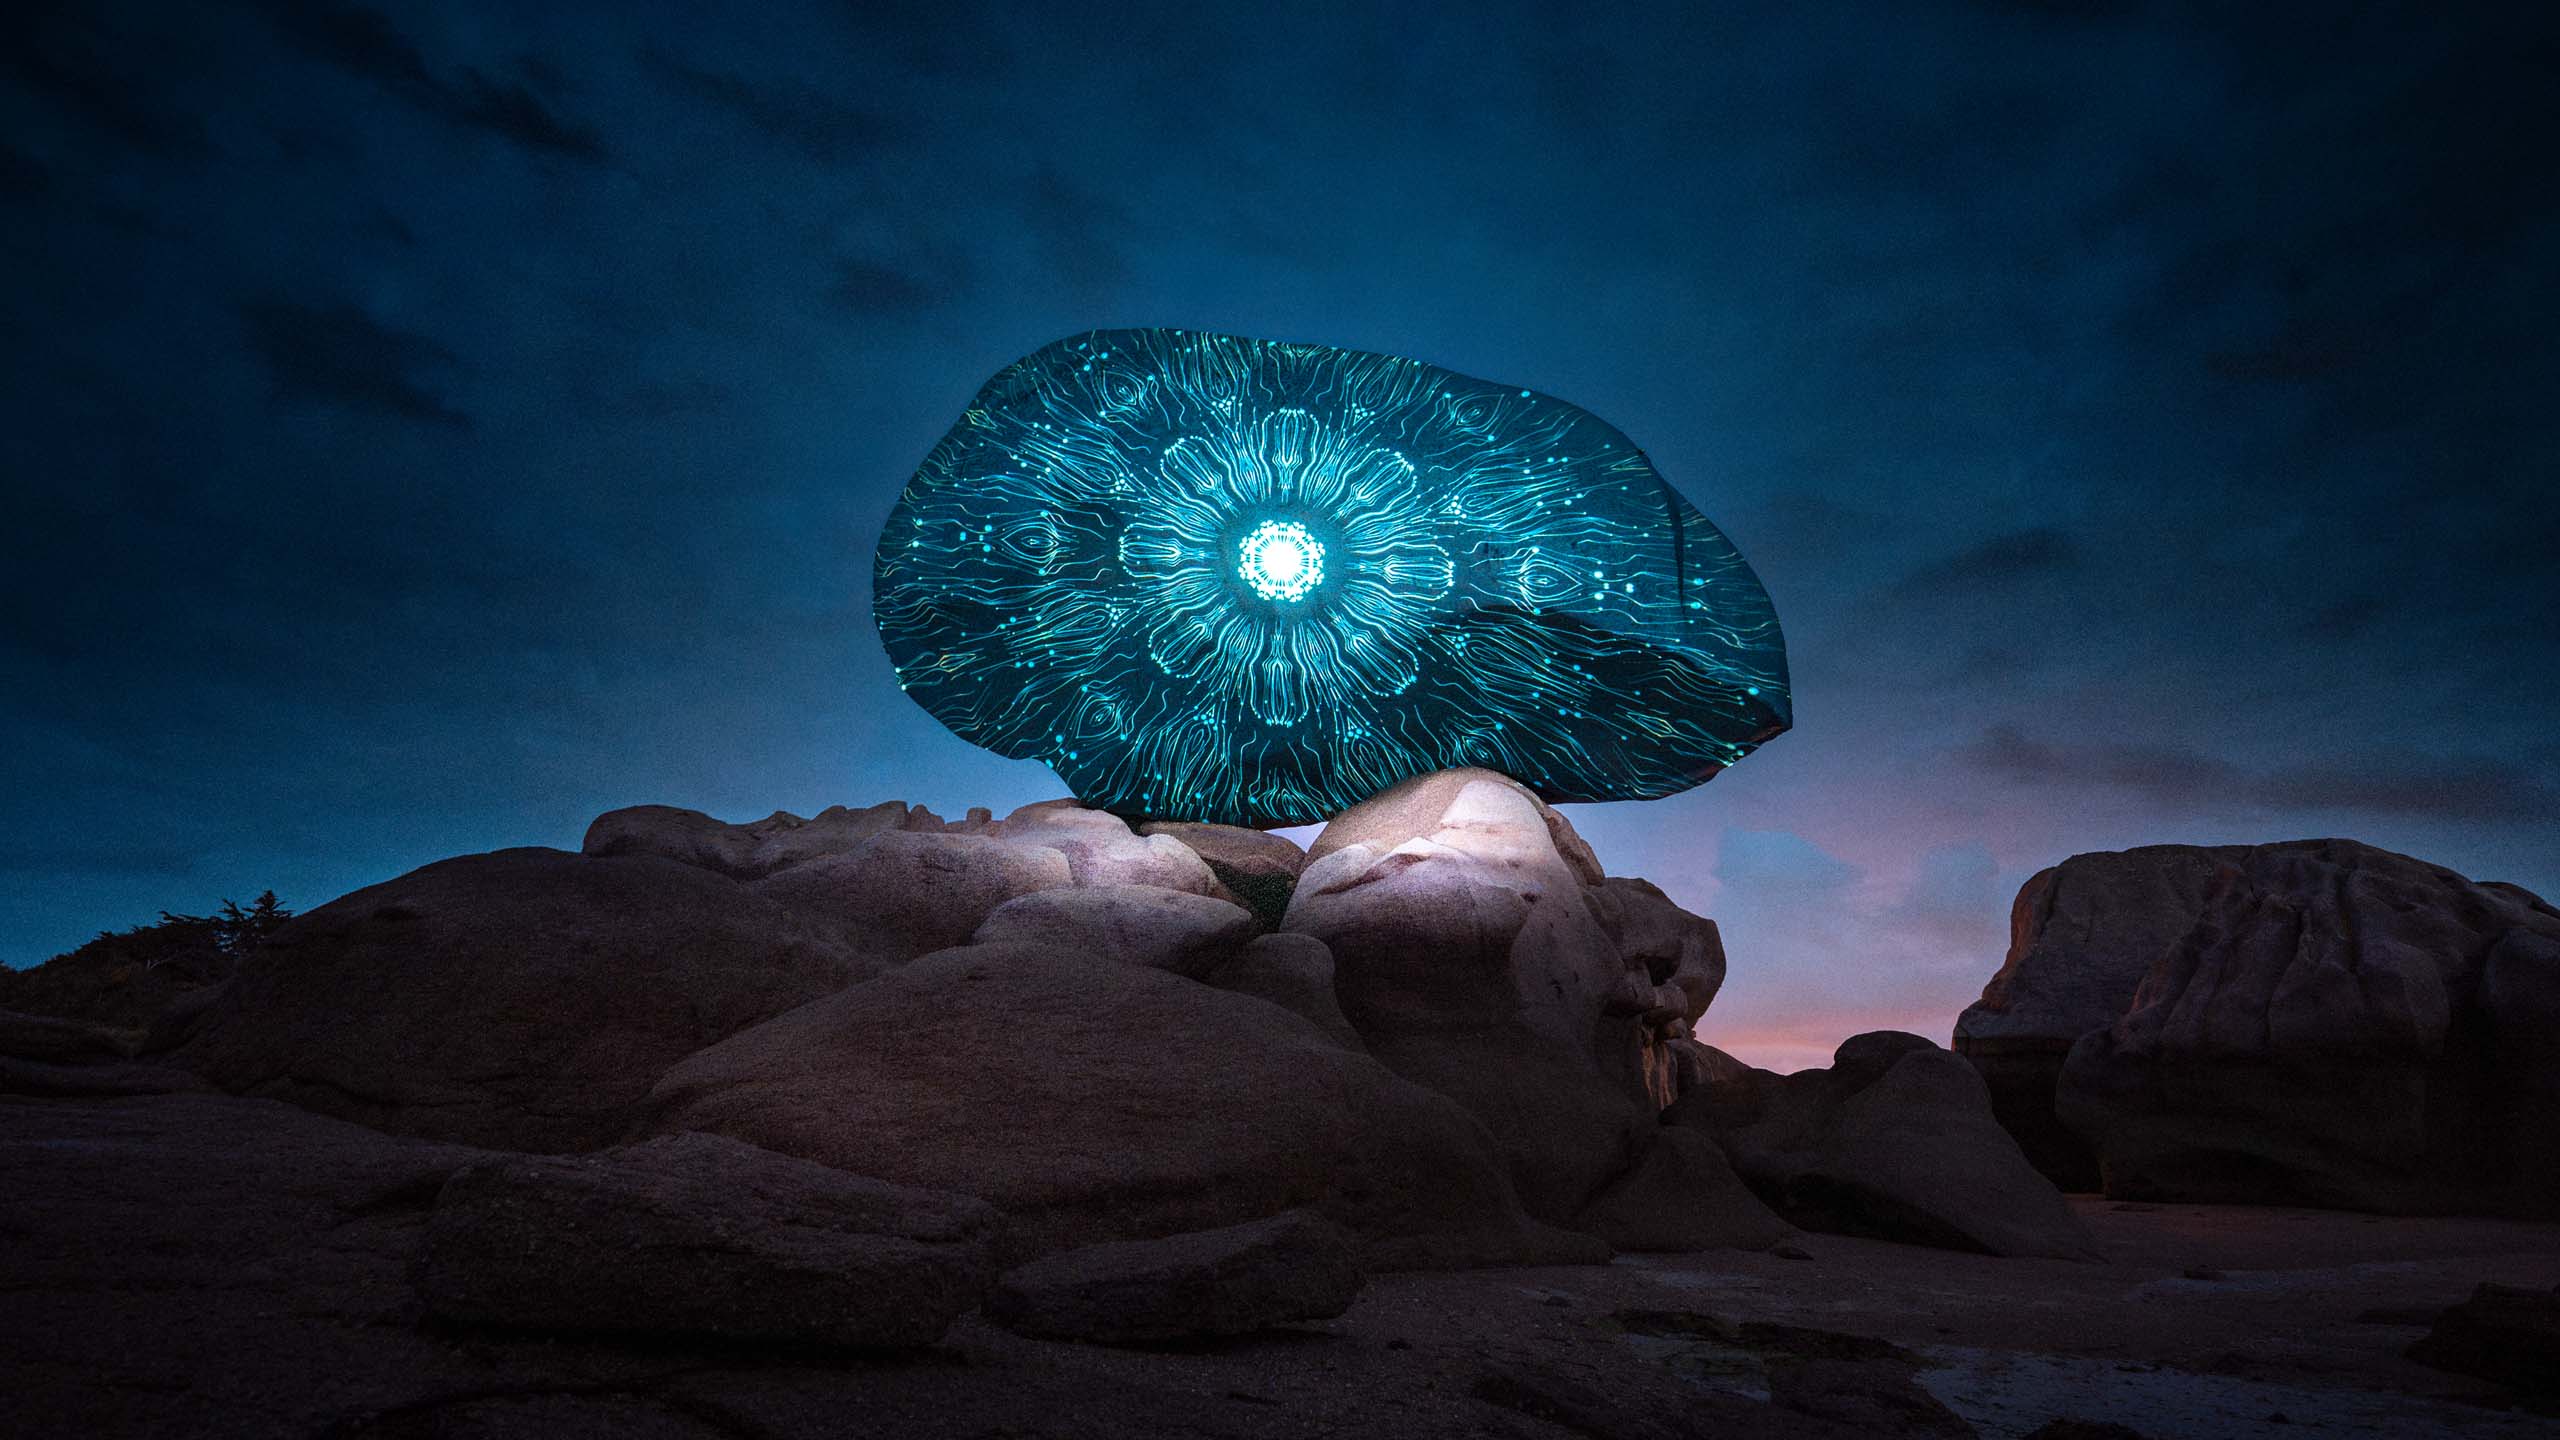 Land-art projection mapping light art on a rock at Côte de Granit Rose in France